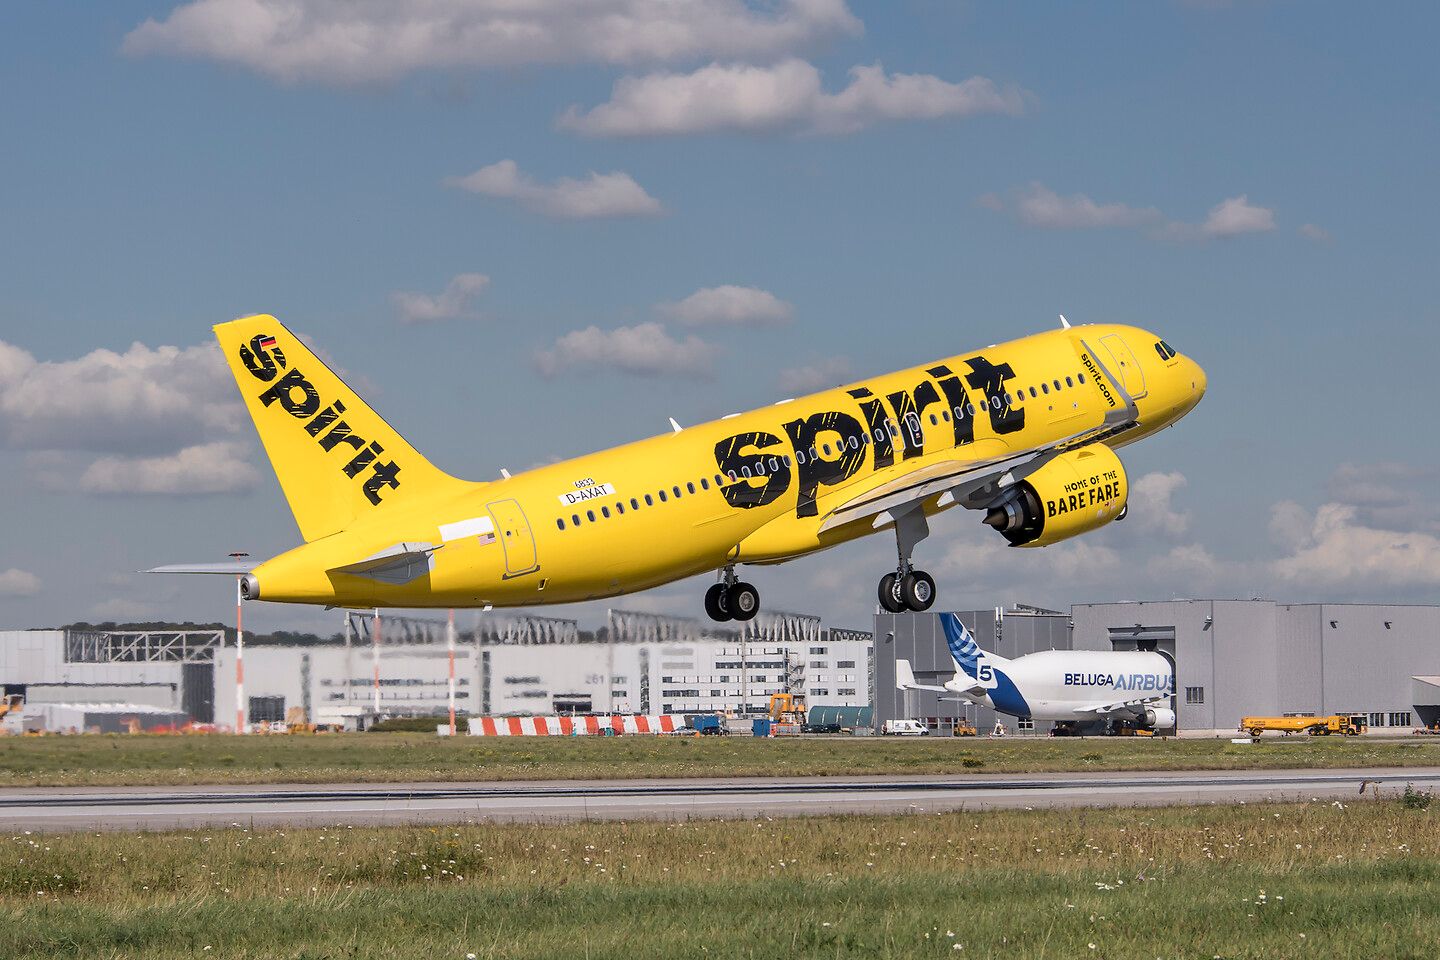 A Spirit Airlines Airbus A320neo